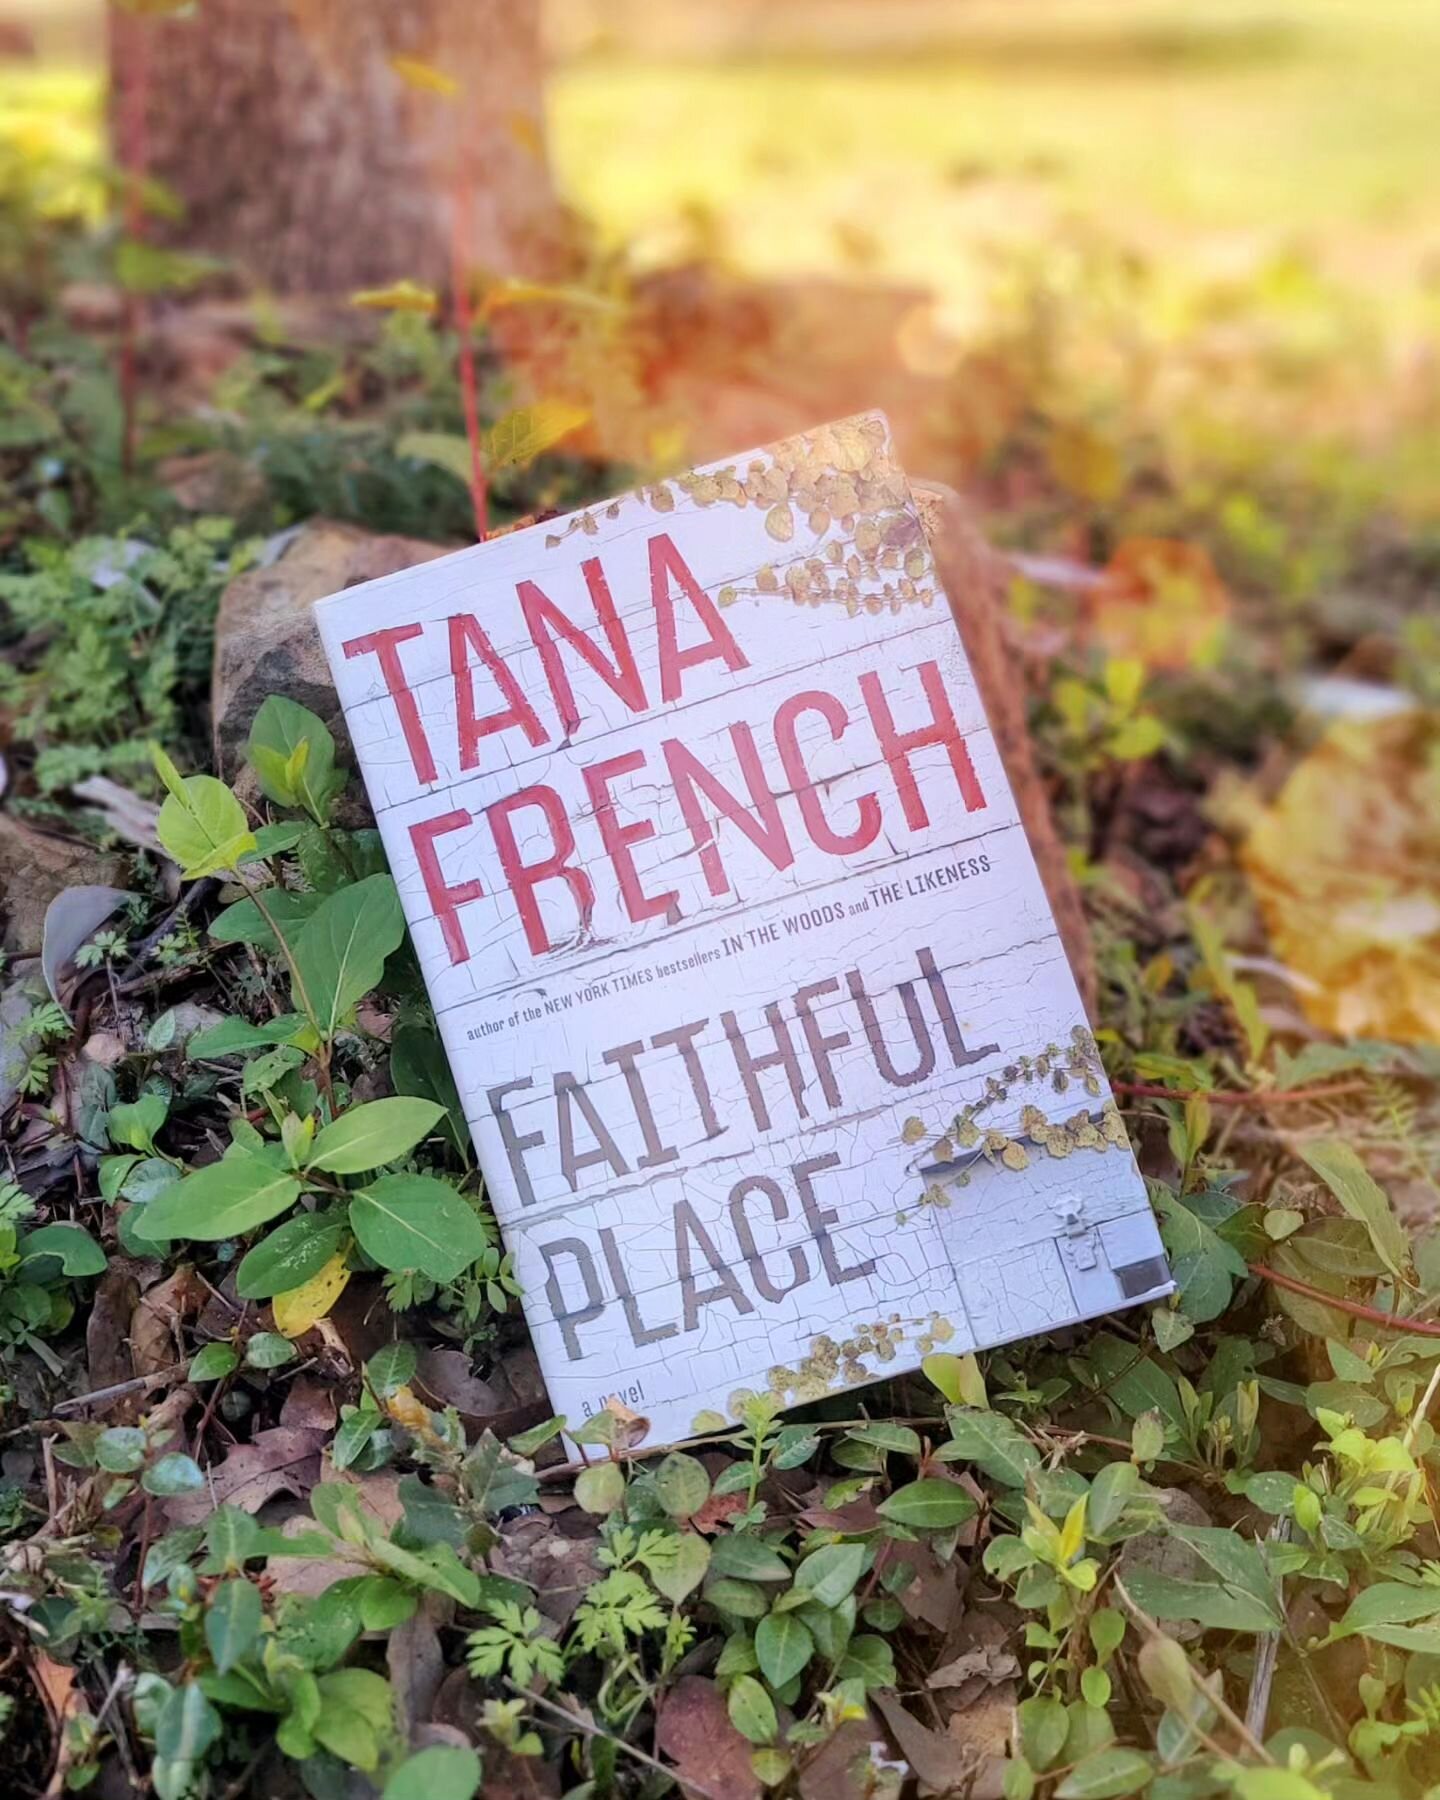 On this gloriously sunny Saint Patrick's Day, I give you my favorite Irish author, Tana French. ☘️

These days, we're all a little Irish, aren't we? My mom's maiden name was Callahan, and our ancestors hailed from County Cork, but I've never been to 